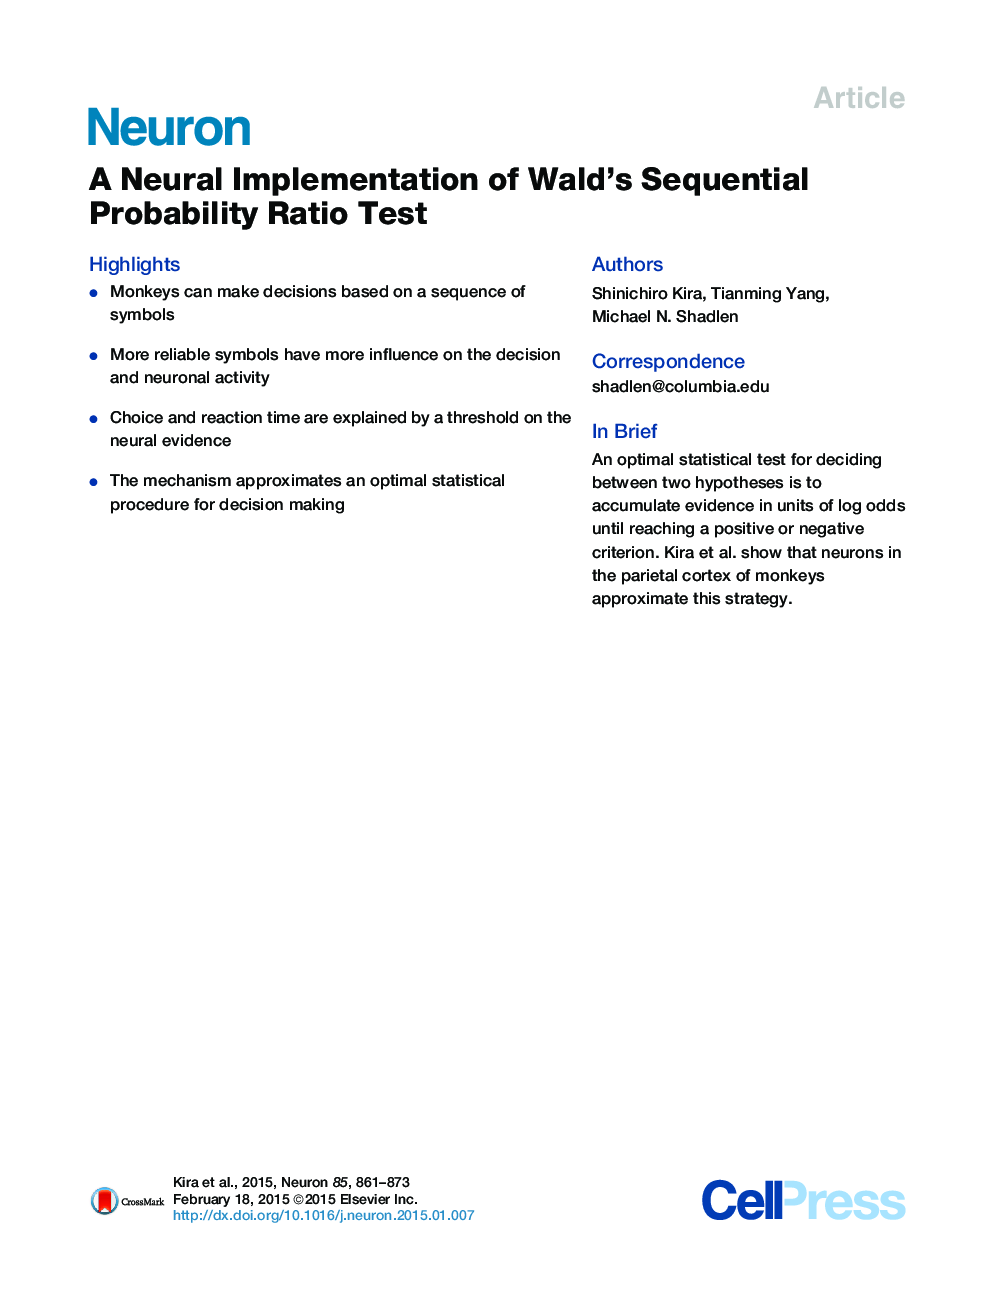 A Neural Implementation of Wald’s Sequential Probability Ratio Test